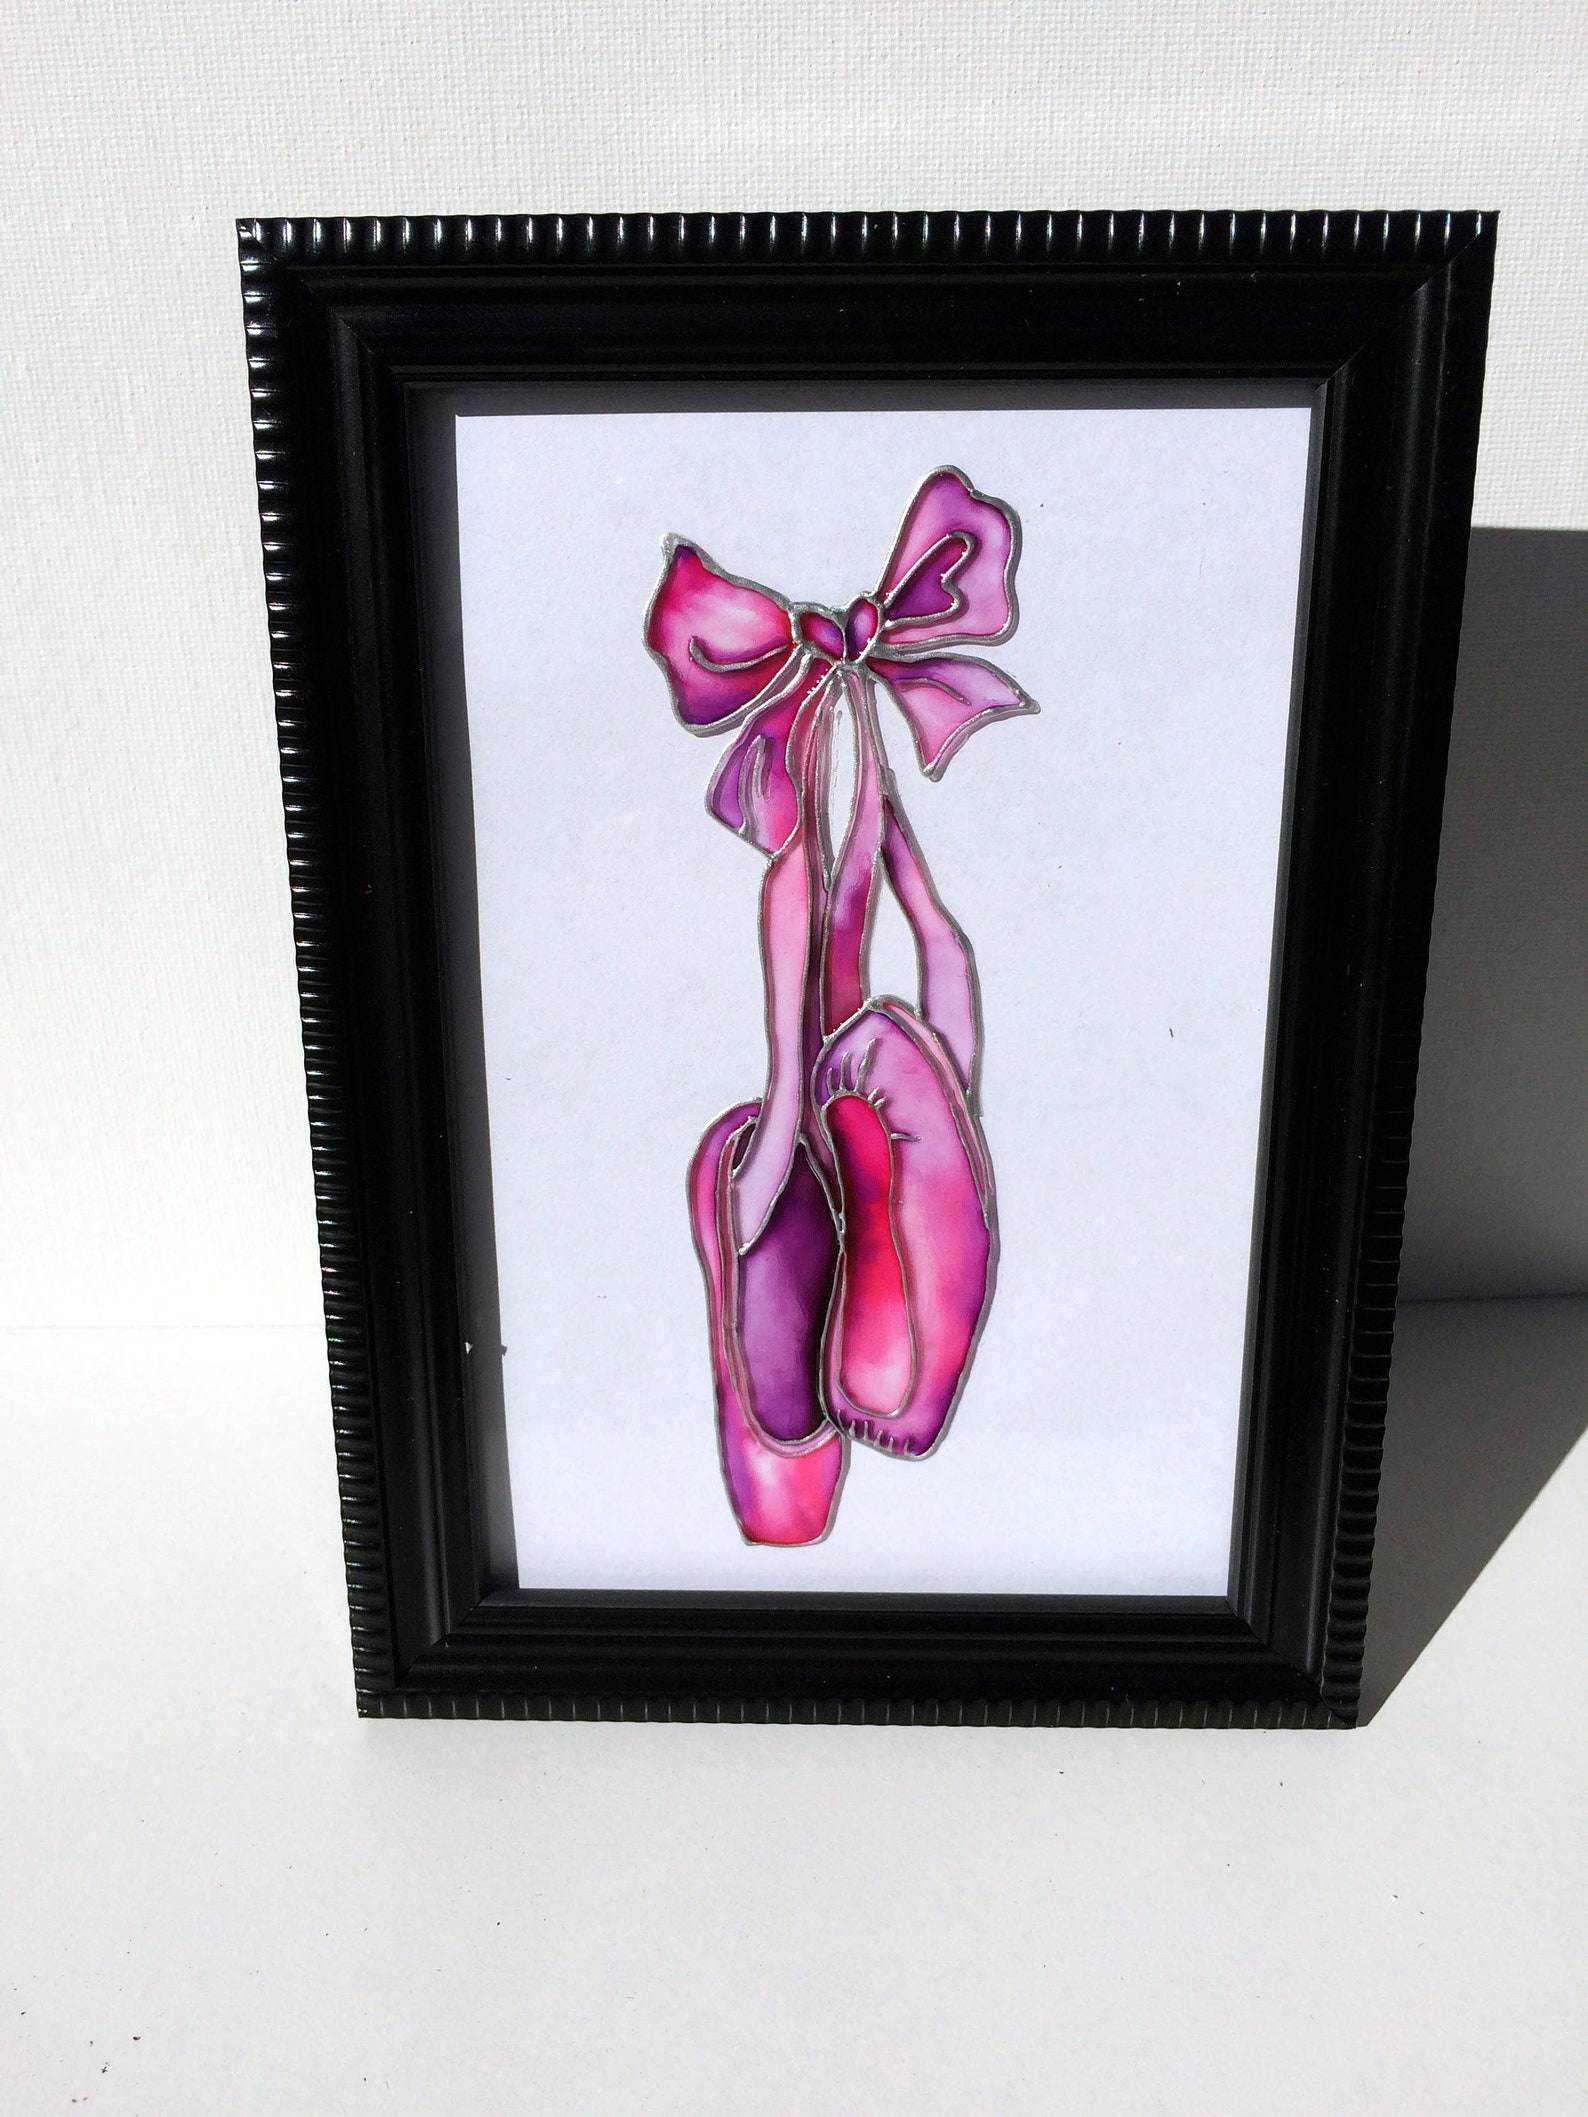 stained glass glass greeting card stained glass patterns painted glass miniatures gift glass panel wall decor ballet ballet shoe